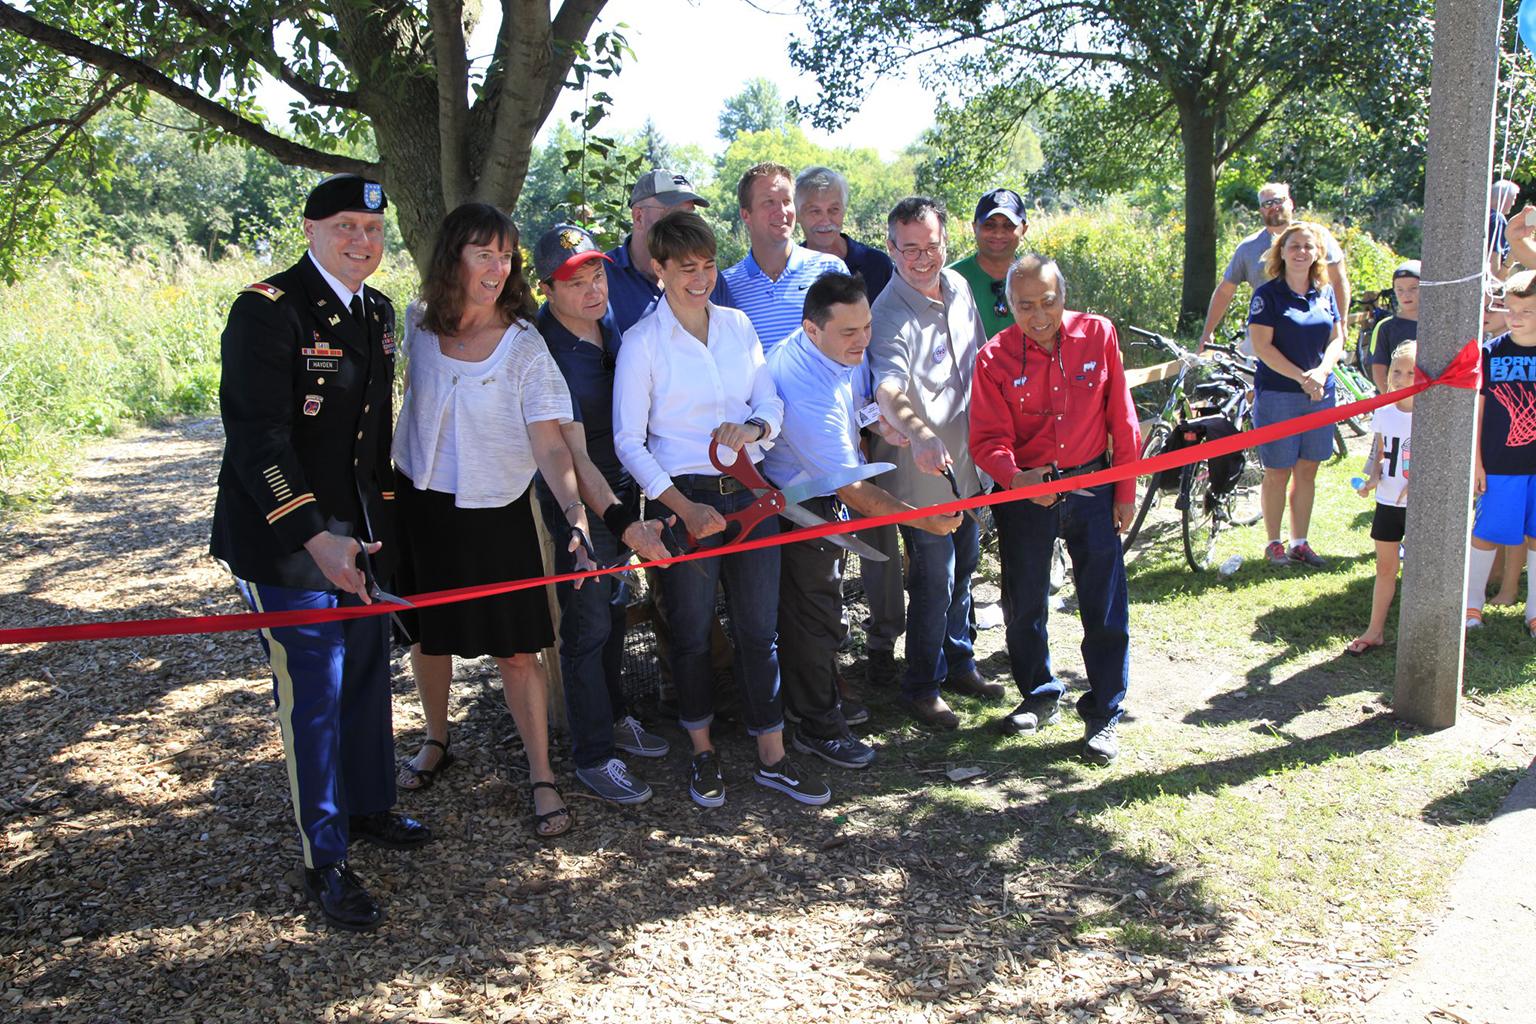 Federal and local officials celebrate the opening of the restored riverfront at Horner Park on Sept. 15, 2018. (Courtesy U.S. Army Corps of Engineers)